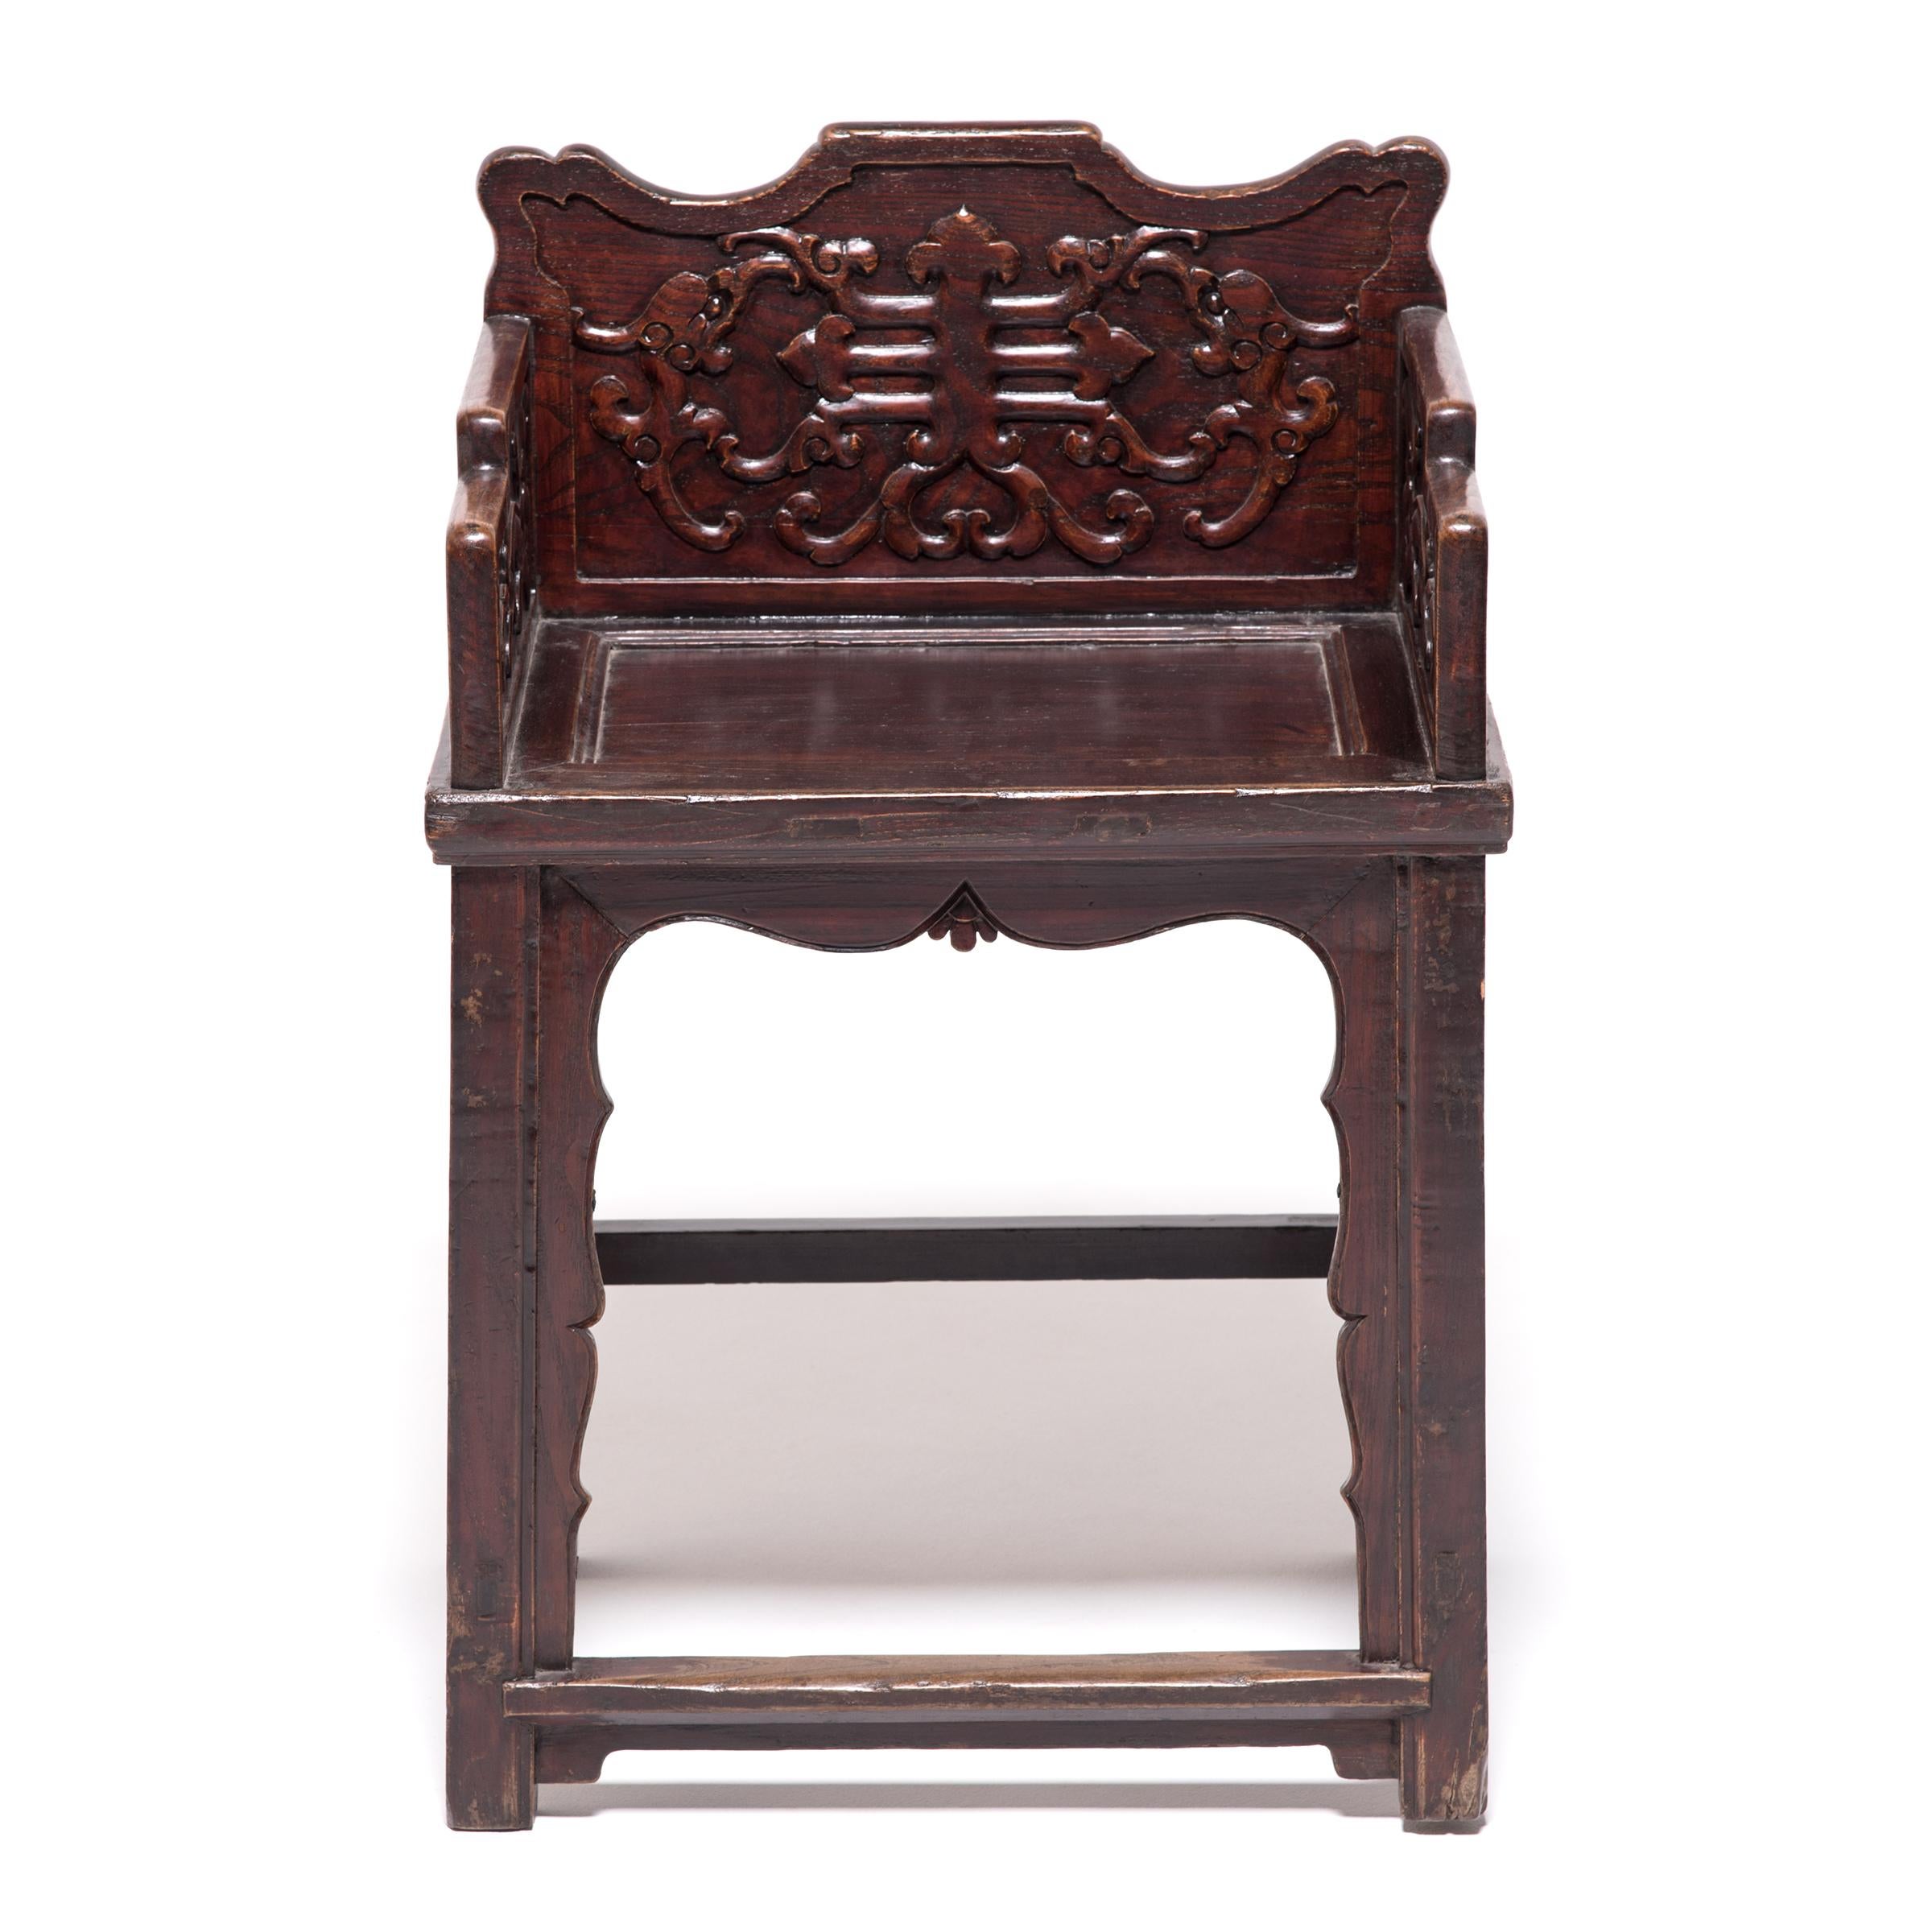 These exquisitely carved, low-back armchairs are utterly unique in silhouette and decoration. Constructed in the Taishiyi style, an ancient design intended for imperial palaces, the chairs play with tradition with scalloped aprons and stepped arm